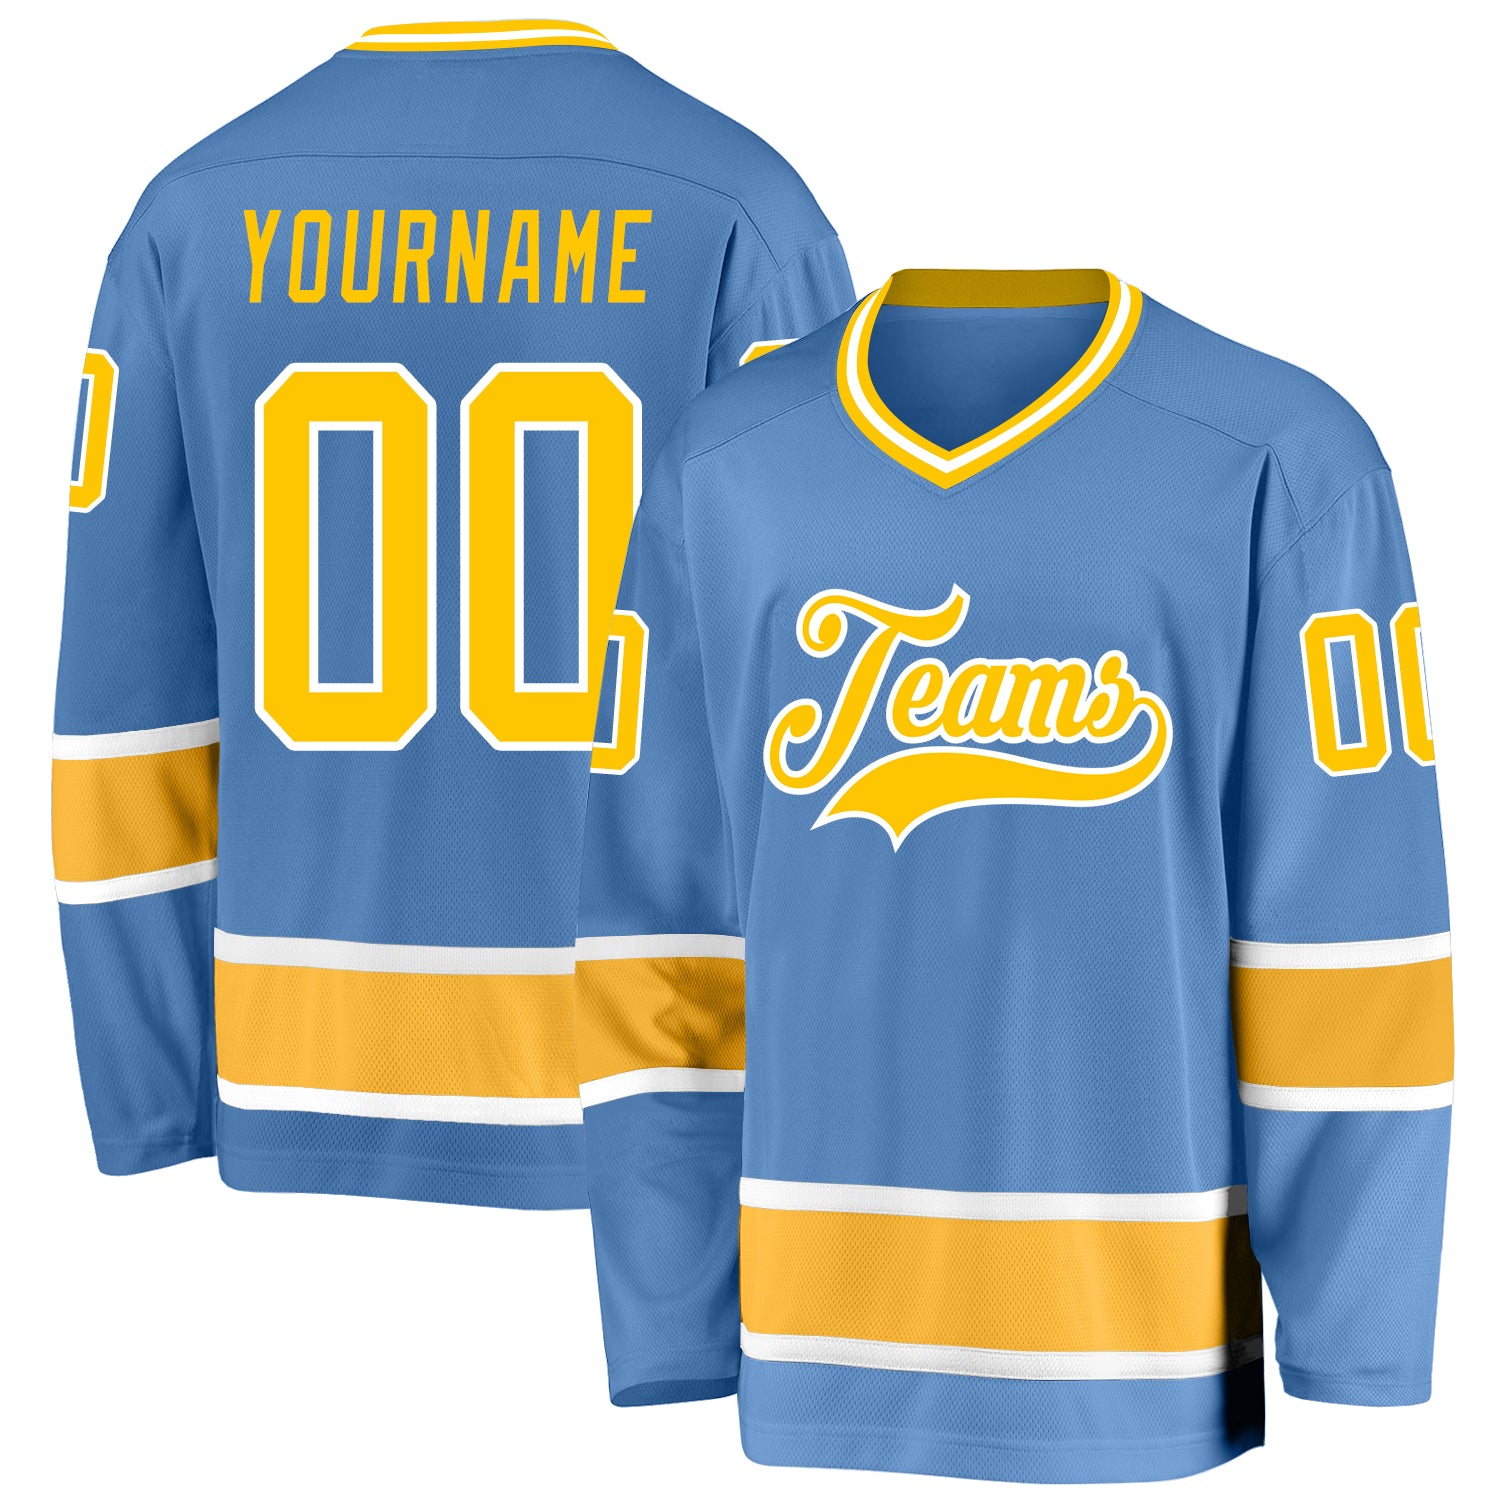  Pullonsy Royal Blue Custom Ice Hockey Jersey for Men Women  Youth S-8XL Practice Stitched Name & Numbers,Golden Edition : Sports &  Outdoors